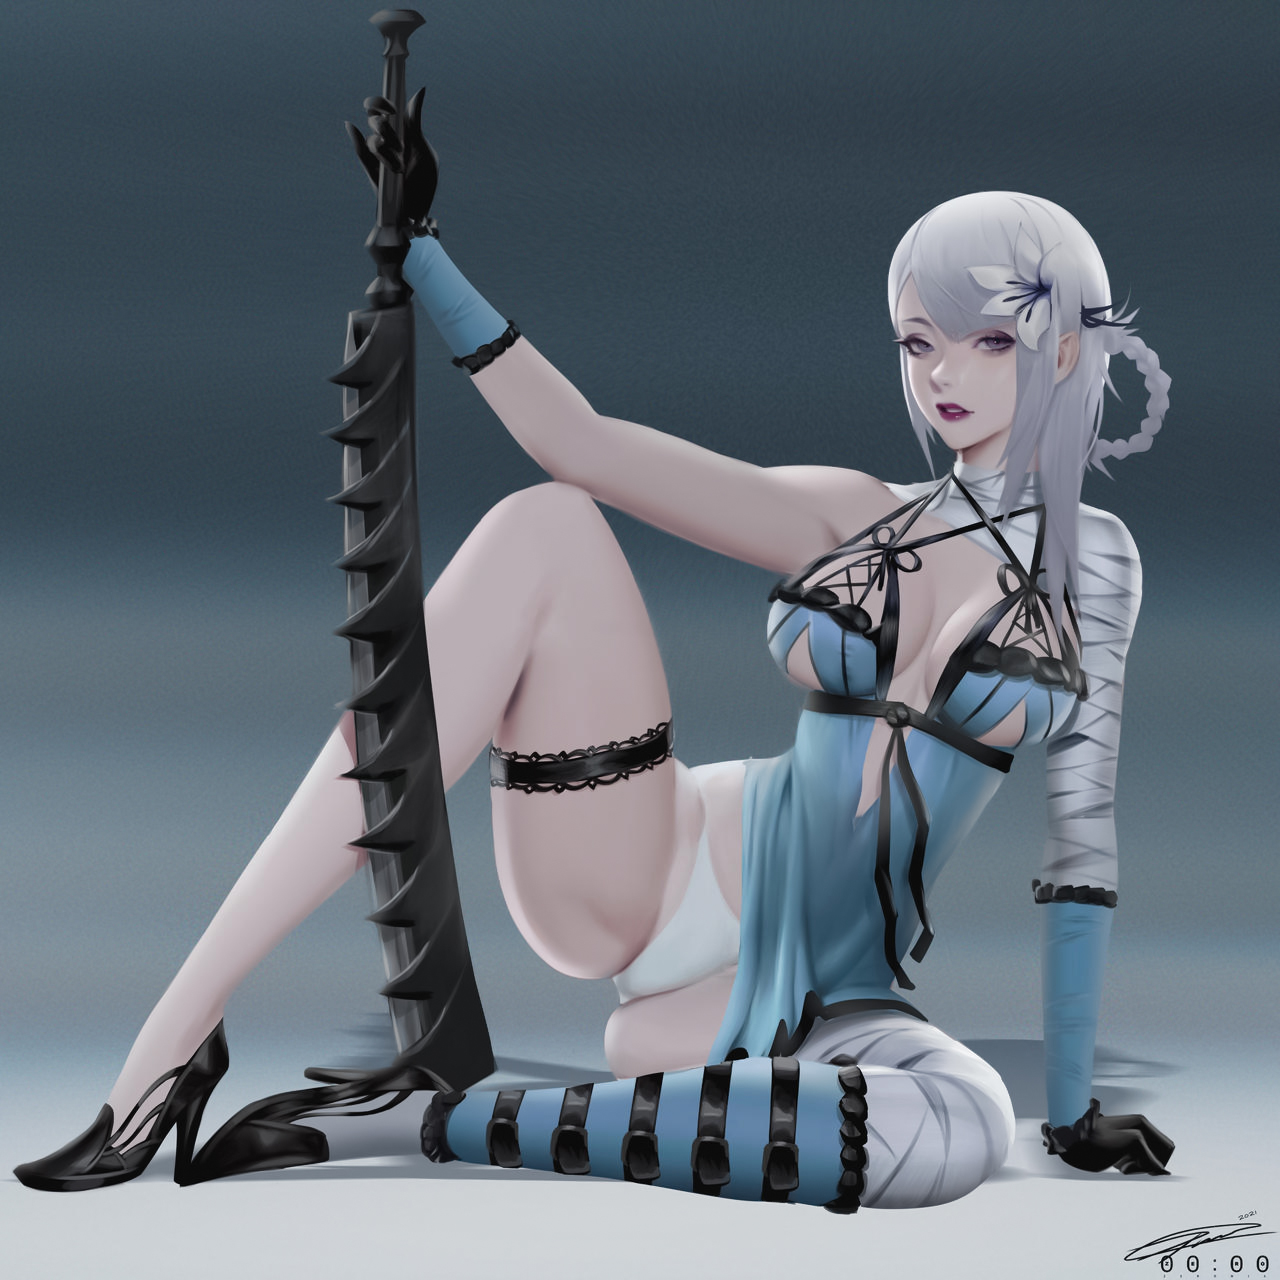 General 1280x1280 Zeronis drawing NieR Replicant women Kaine (NieR) silver hair flower in hair skimpy clothes panties stripes straps weapon sword on the floor blue